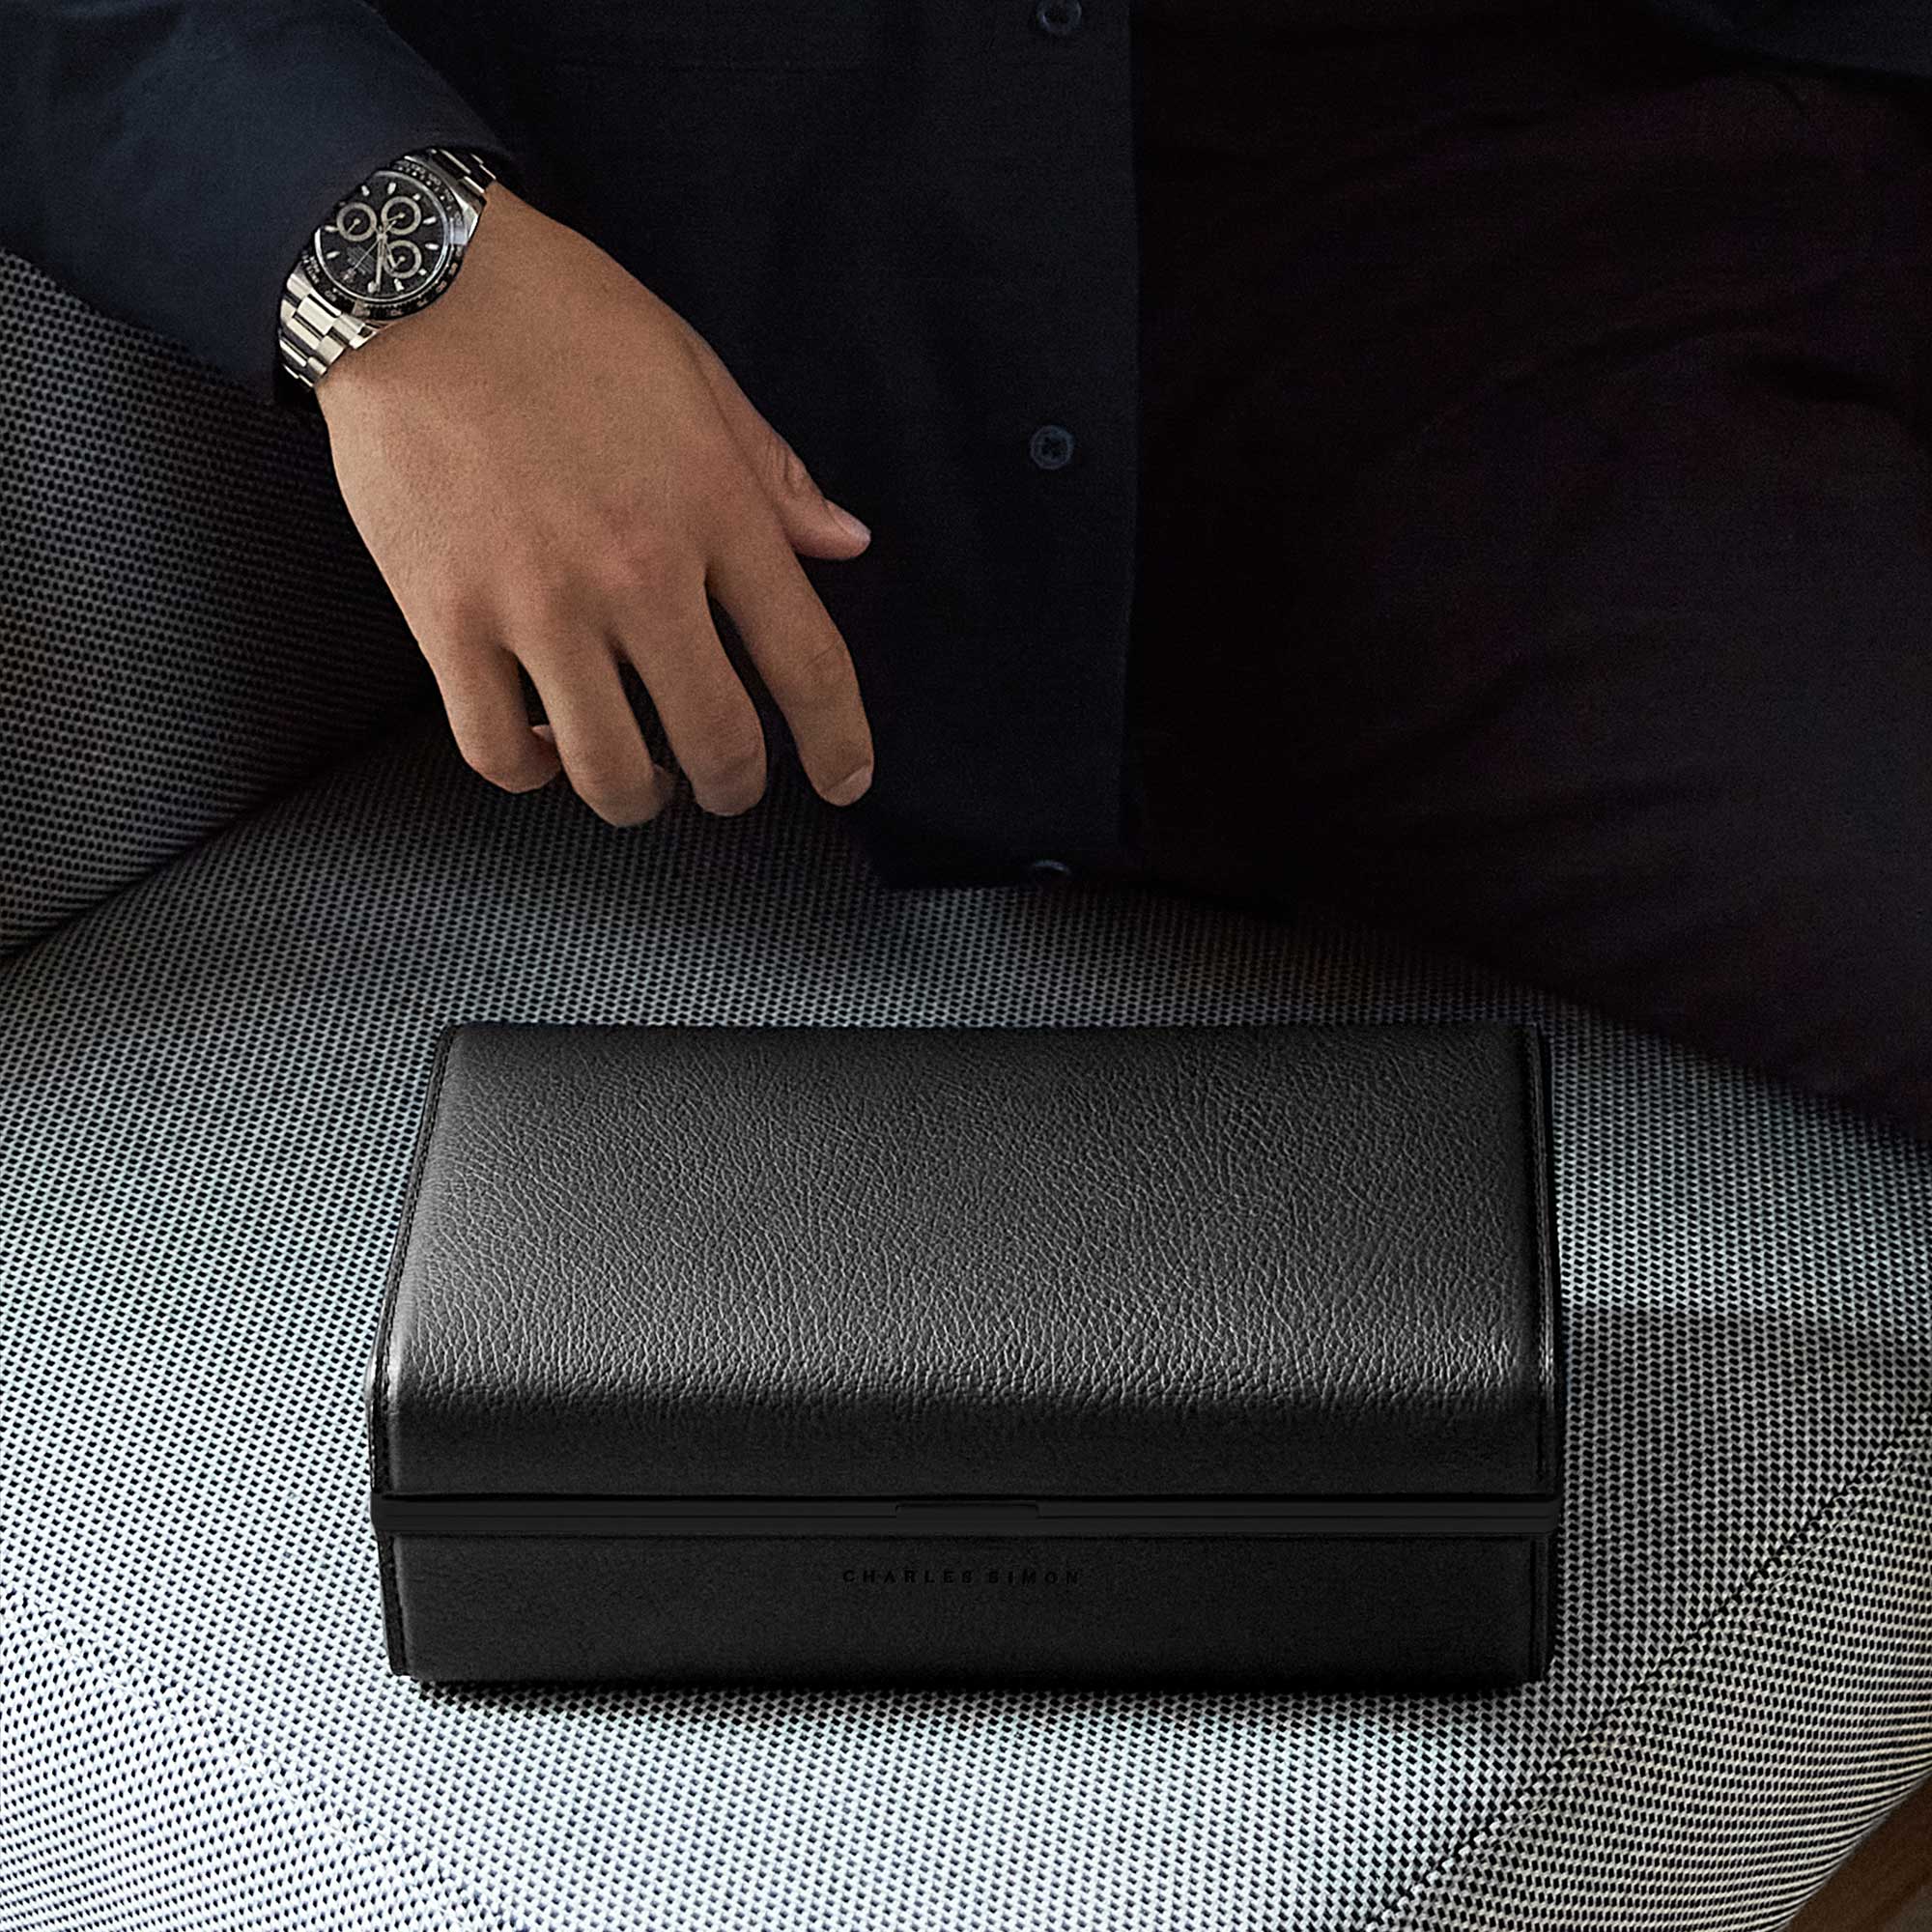 Eaton 3 watch case in all black leather, anodized aluminum and Alcantara placed on grey couch with gentleman's hand sporting men's luxury watch hovering above